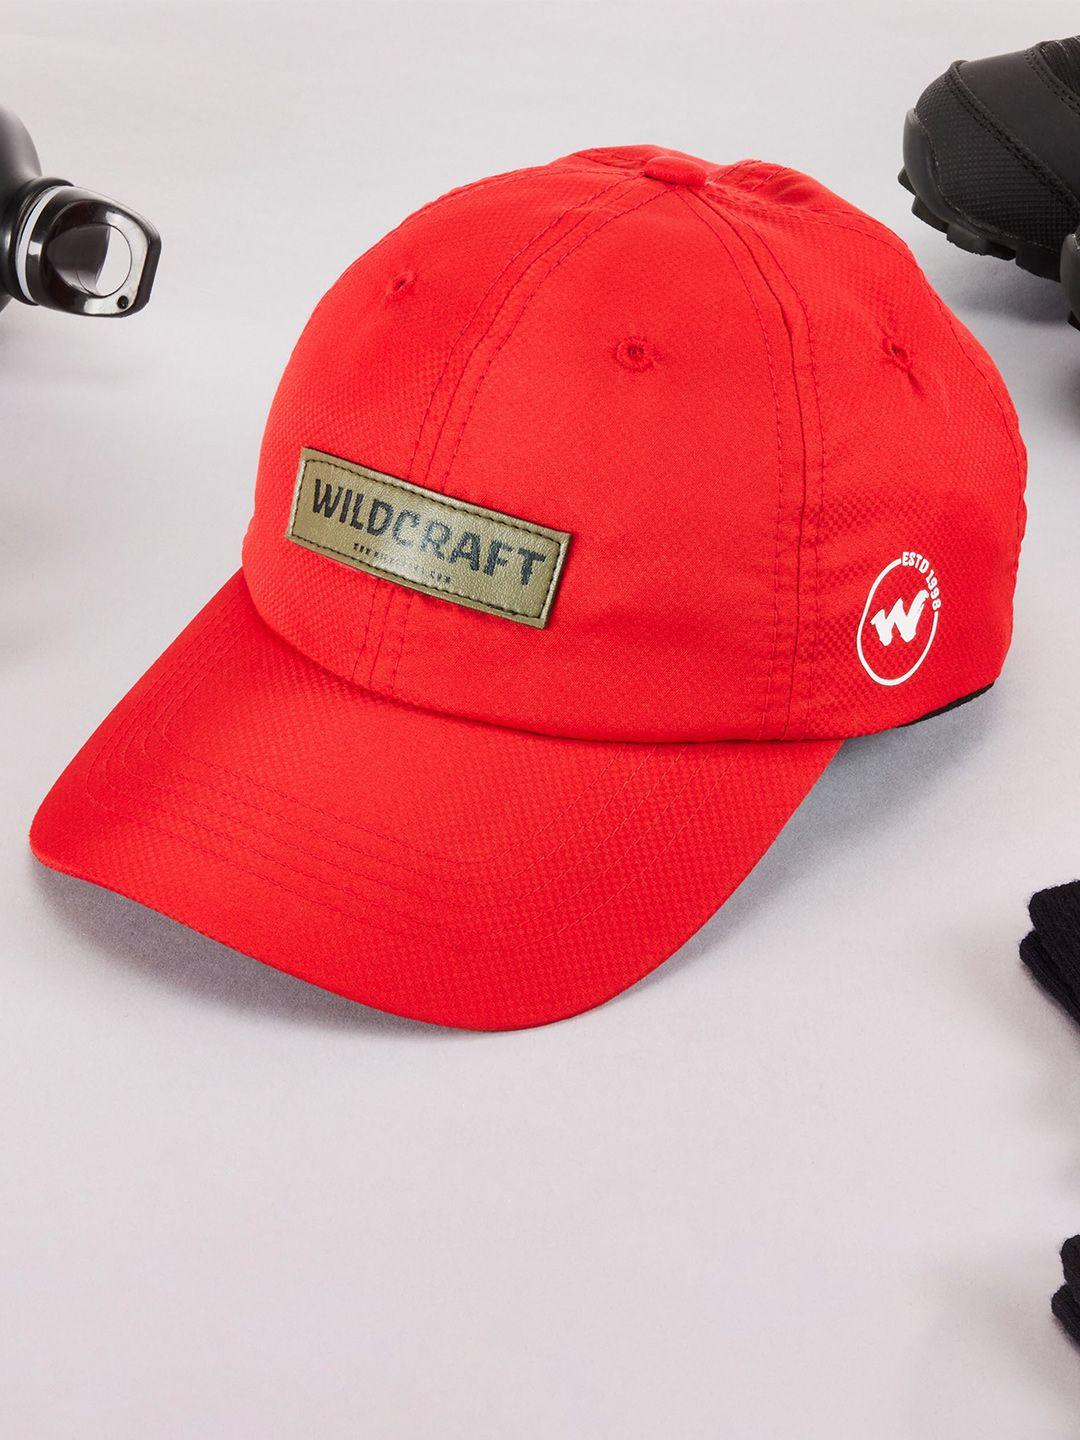 wildcraft adults red brand printed cotton baseball cap